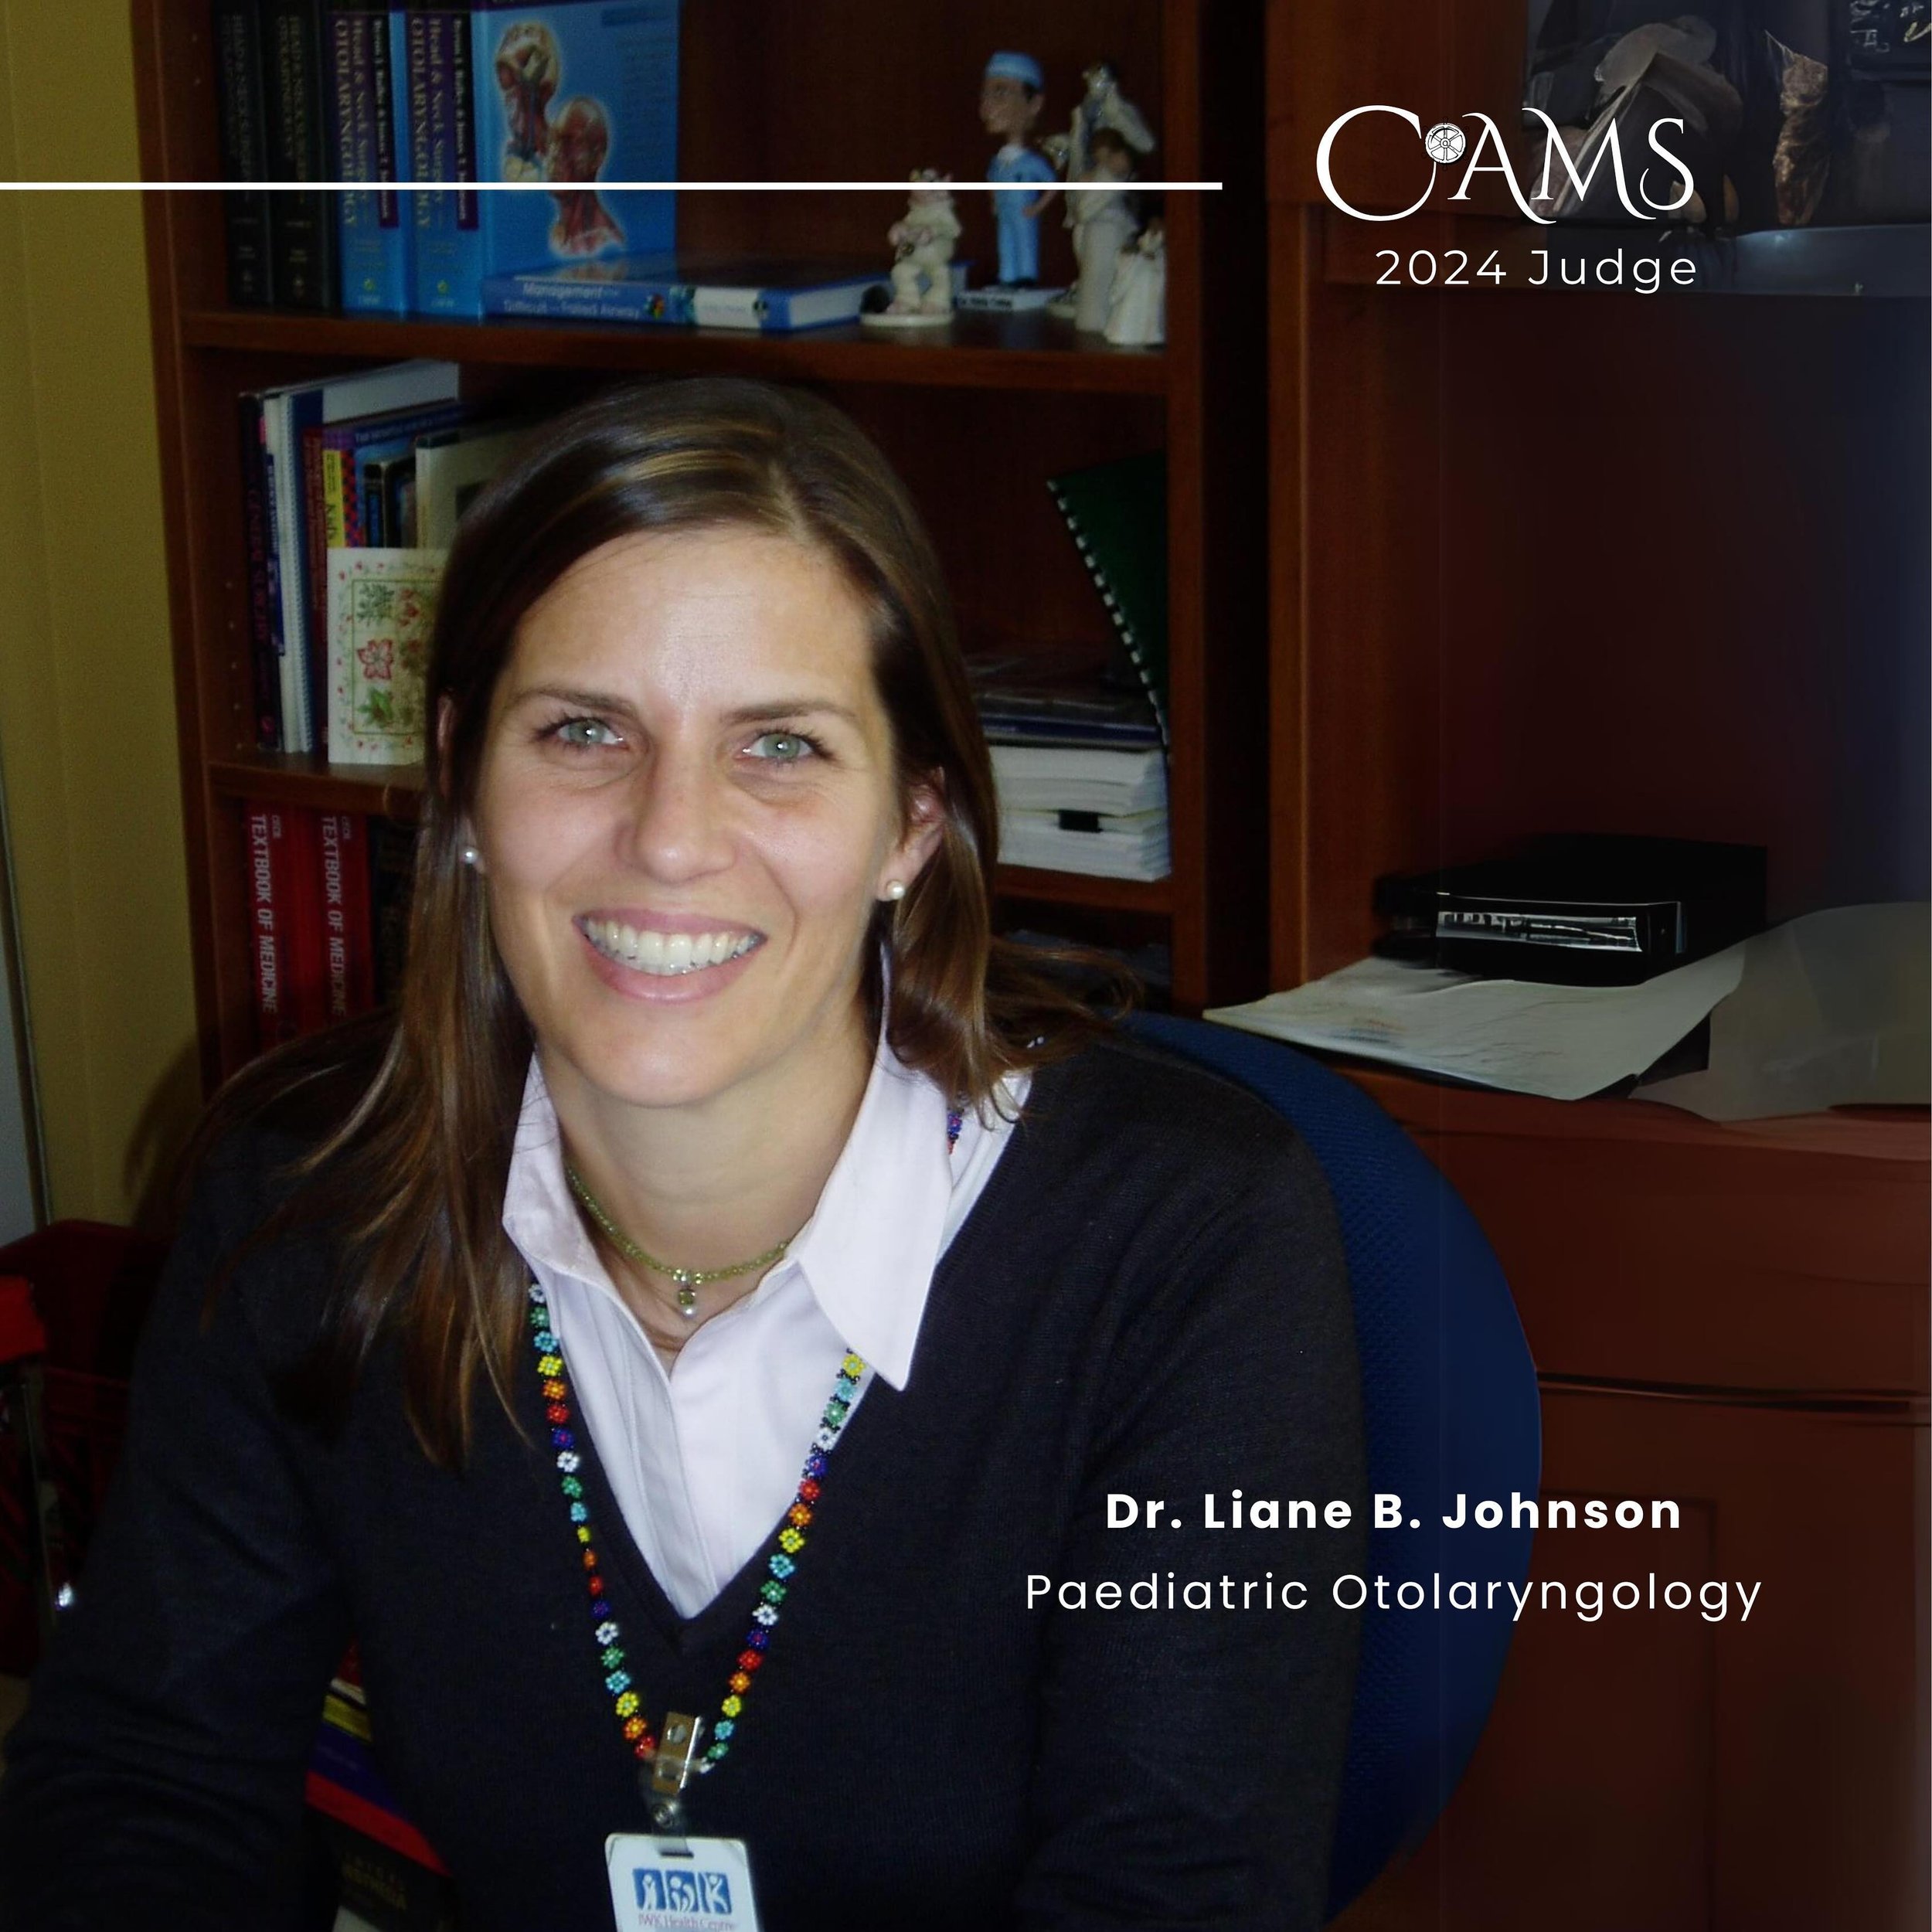 Liane B. Johnson MDCM, FRCS(C), FACS
 Paediatric Otolaryngology-Head and Neck Surgery (OHNS) 
After fellowship completion at Cincinnati Children&rsquo;s Medical Center (&rsquo;01-&rsquo;03), Dr. Johnson joined the Division of Paediatric Otolaryngolog